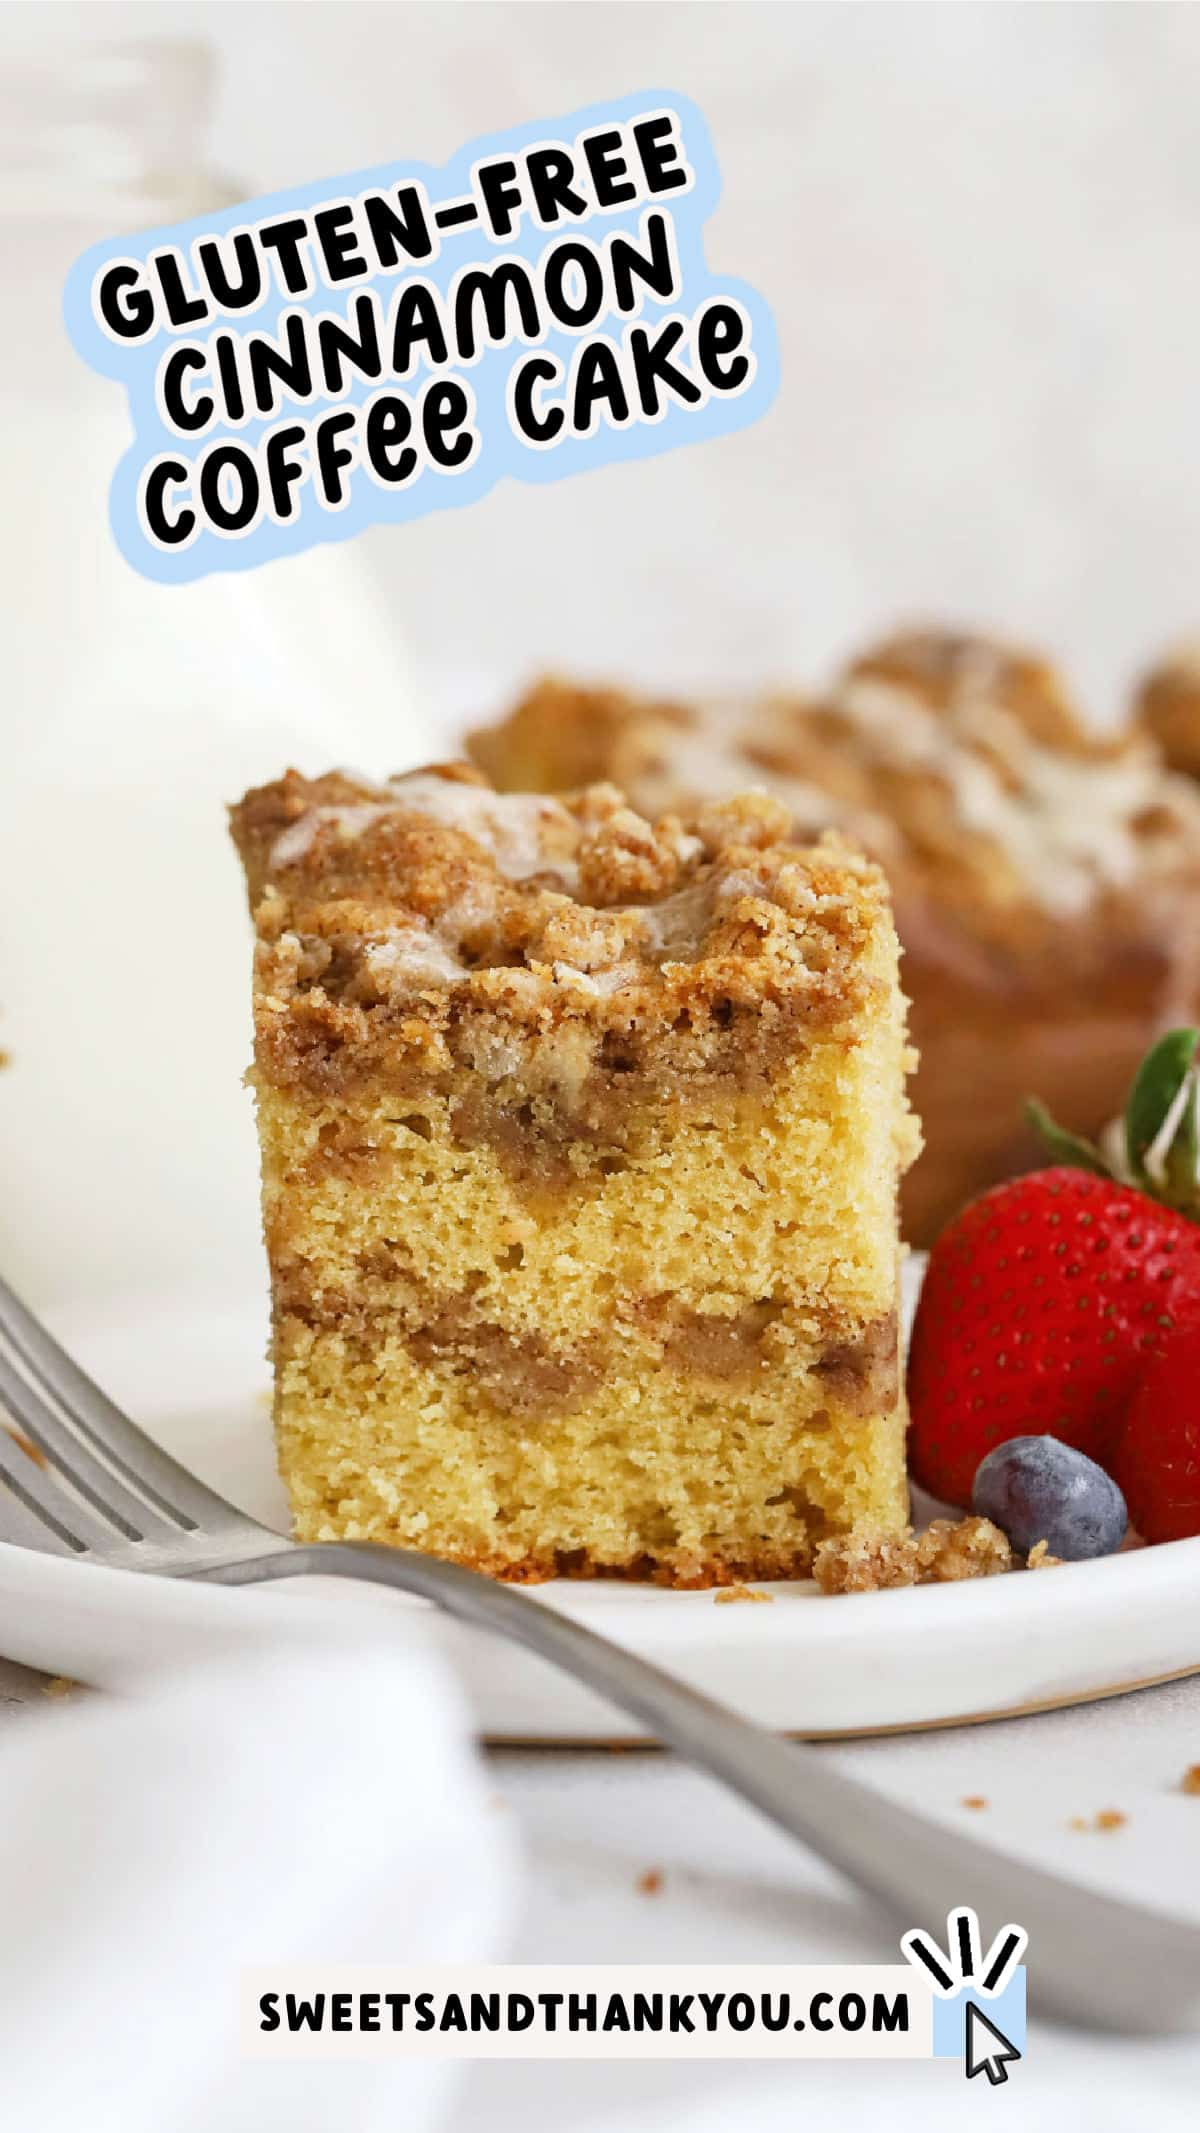 Our Gluten-Free Cinnamon Coffee Cake recipe has all the classic flavor you love, simply made gluten-free! This gluten-free crumb cake might just become your new favorite holiday breakfast. We combine fluffy, buttery vanilla cake with two layers of brown sugar cinnamon streusel topping for a delicious special occasion breakfast treat your whole family will love. Get the recipe at sweetsandthankyou.com